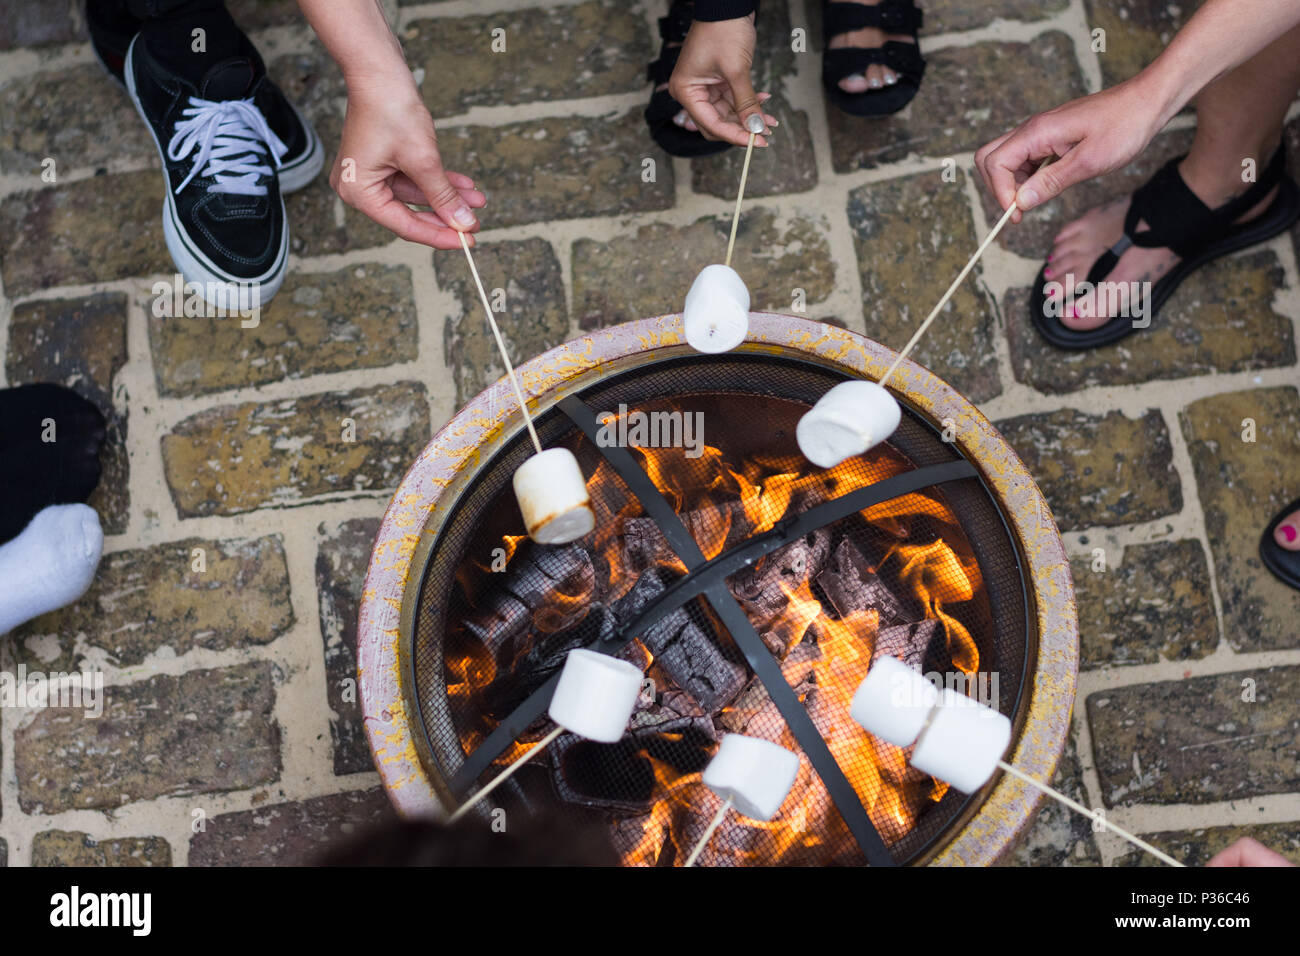 People toasting marshmellows sur open fire pit at garden party Banque D'Images